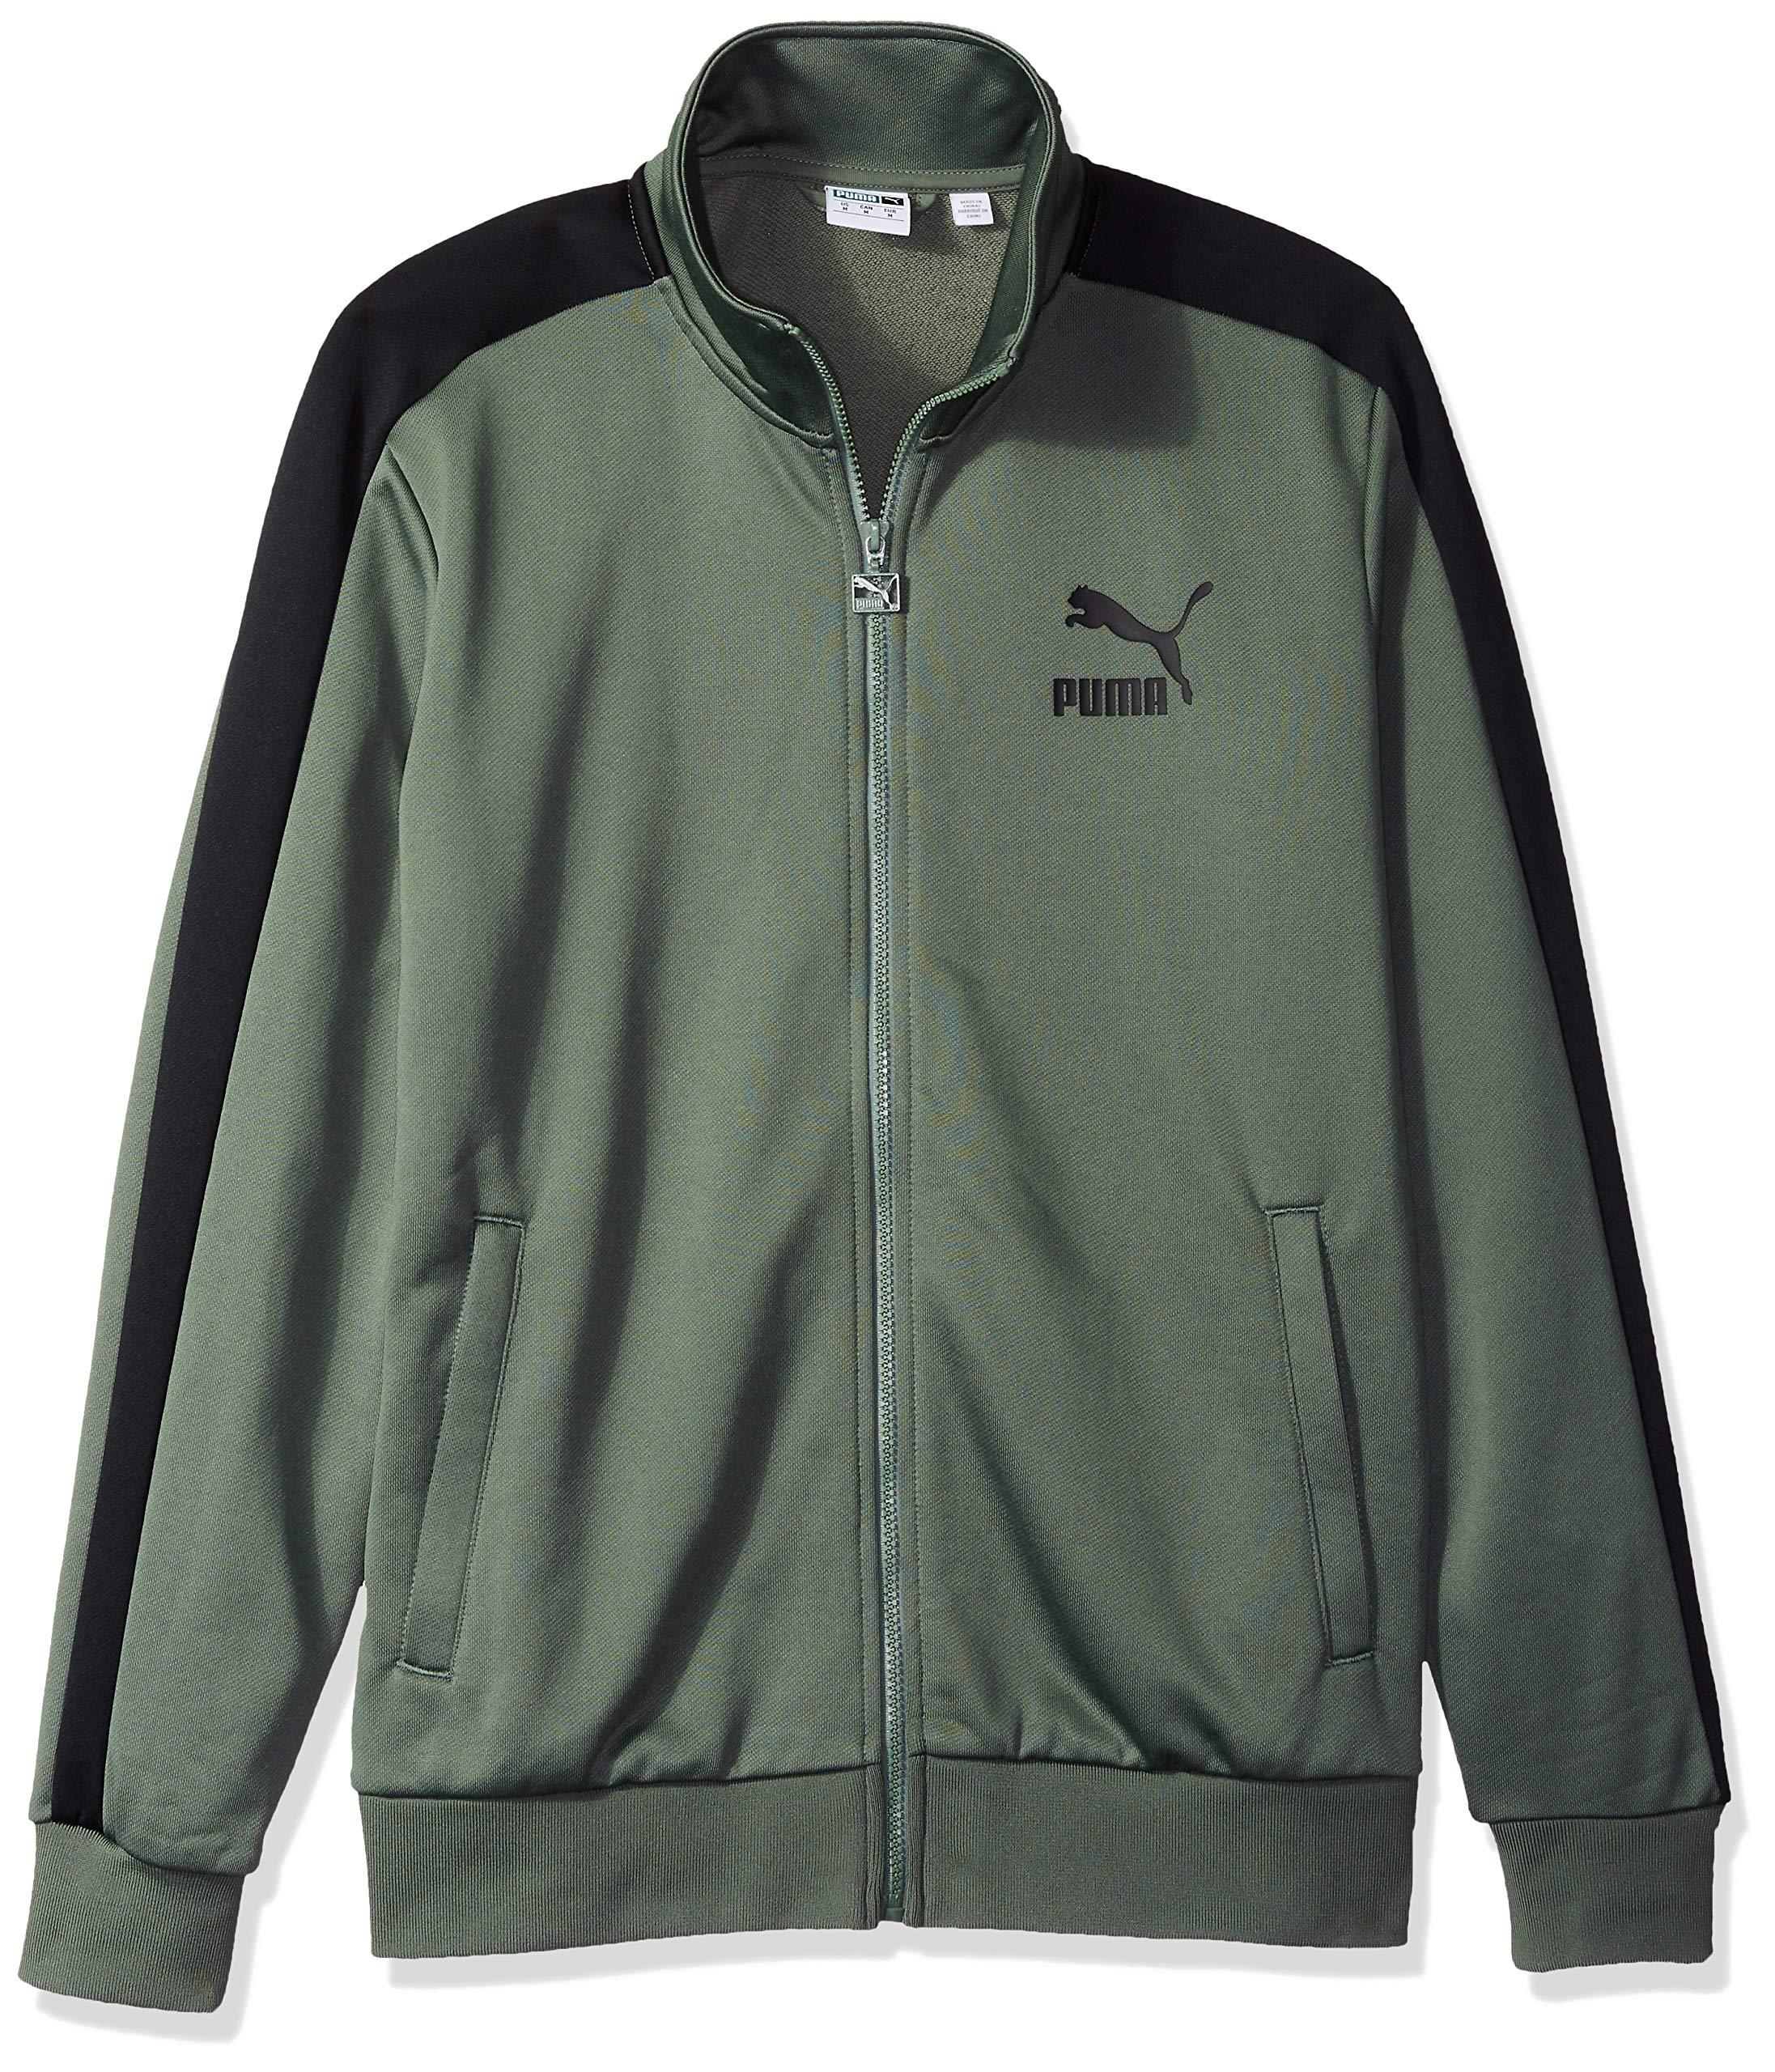 PUMA Archive T7 Track Jacket in Green for Men - Lyst